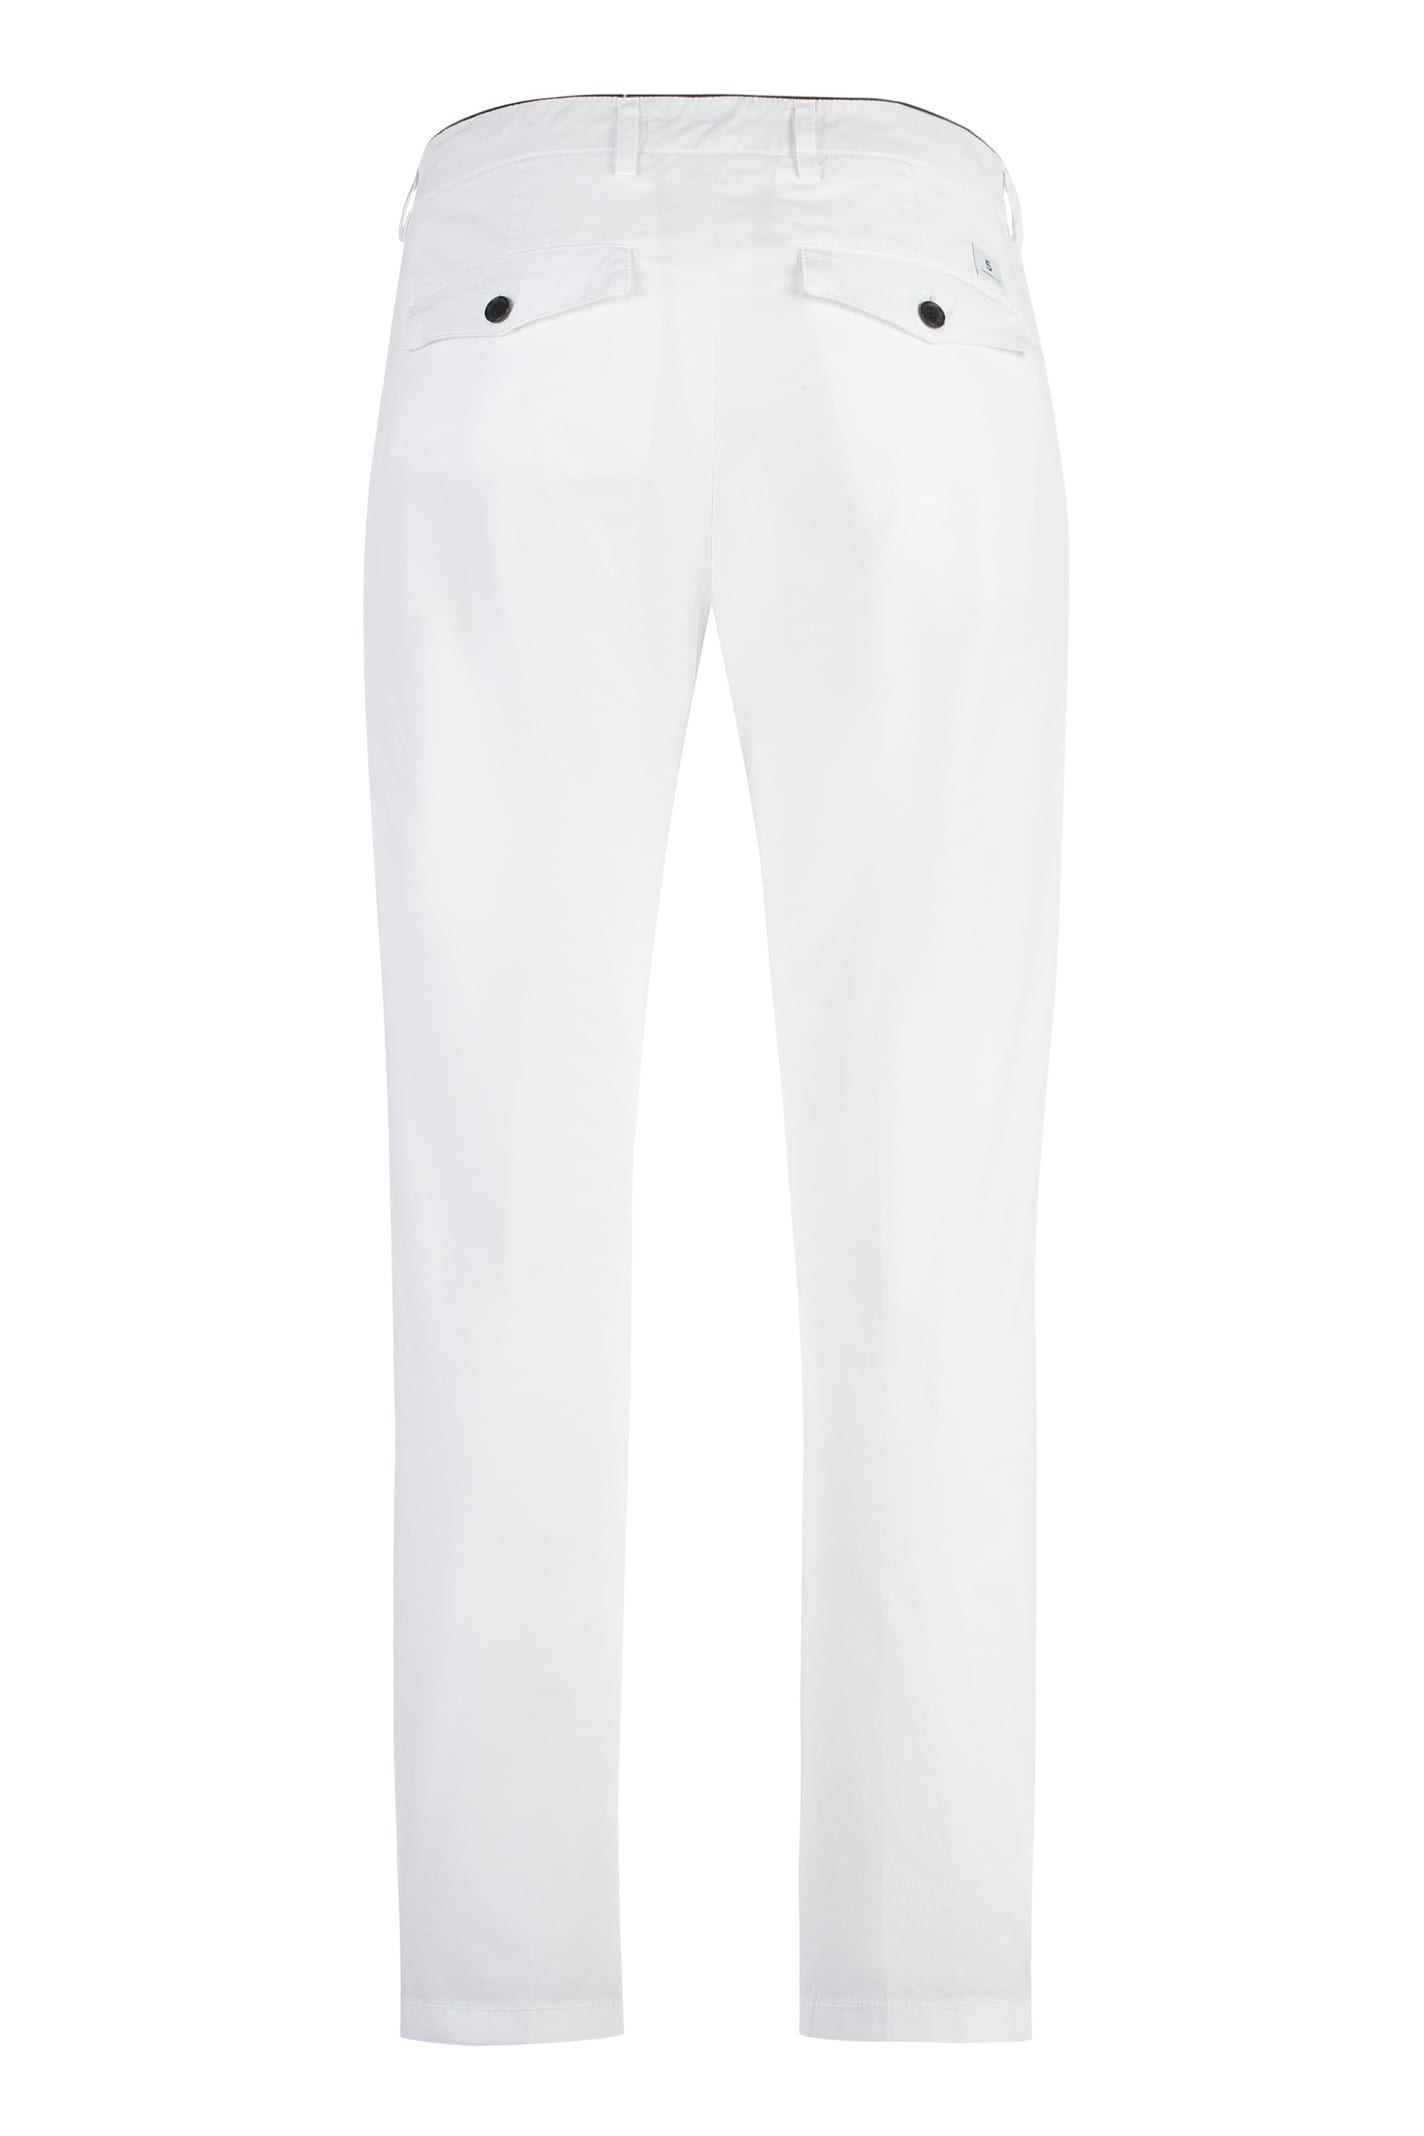 Shop Department Five Prince Chino Pants In White